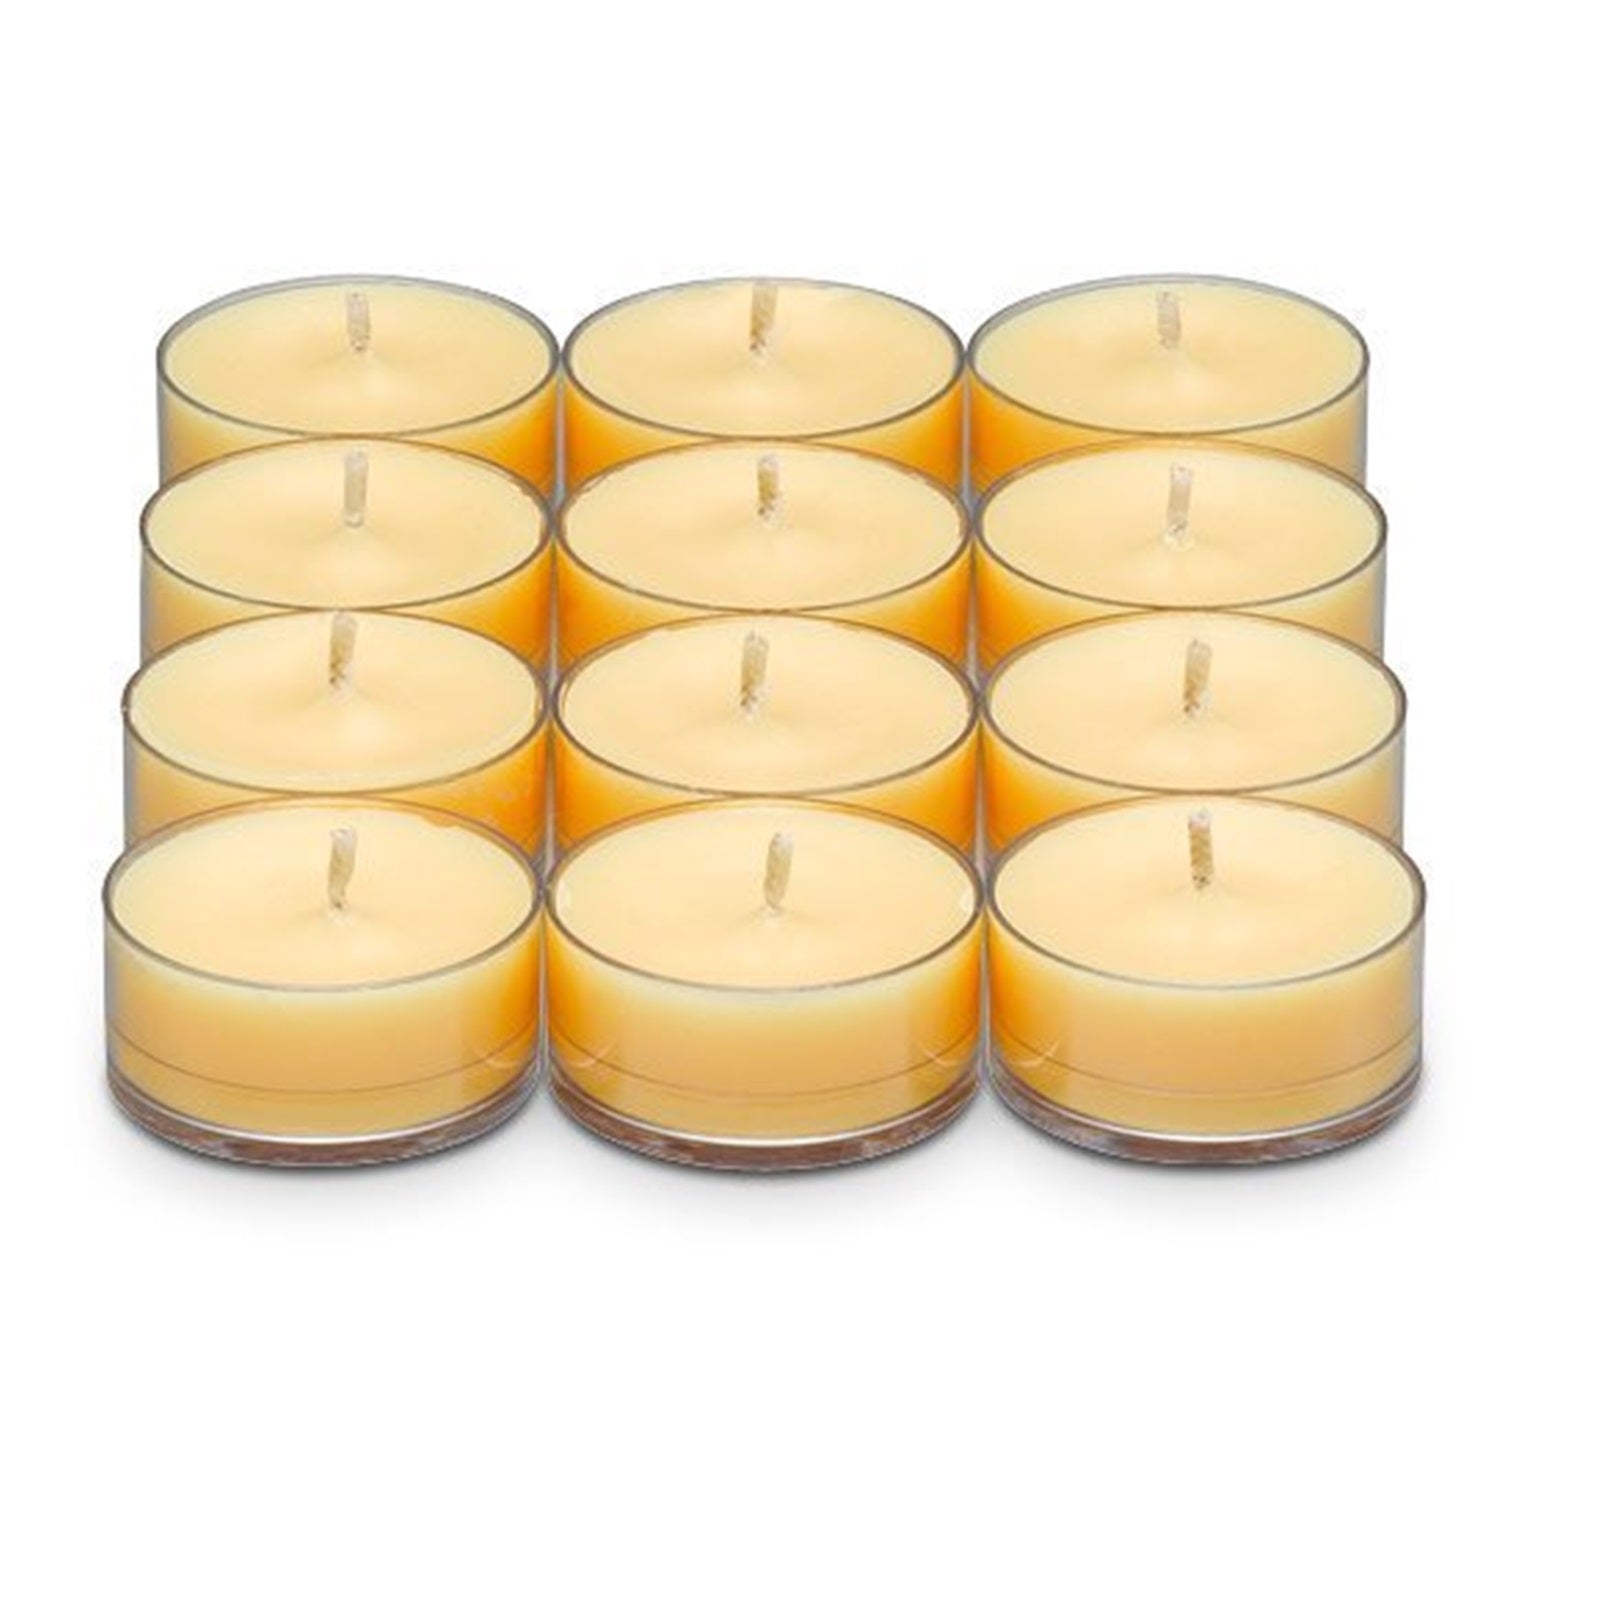 PartyLite Tealight Candles - 1 Box - 1 Dozen Tealights - 12 CANDLES GLOWING EMBERS